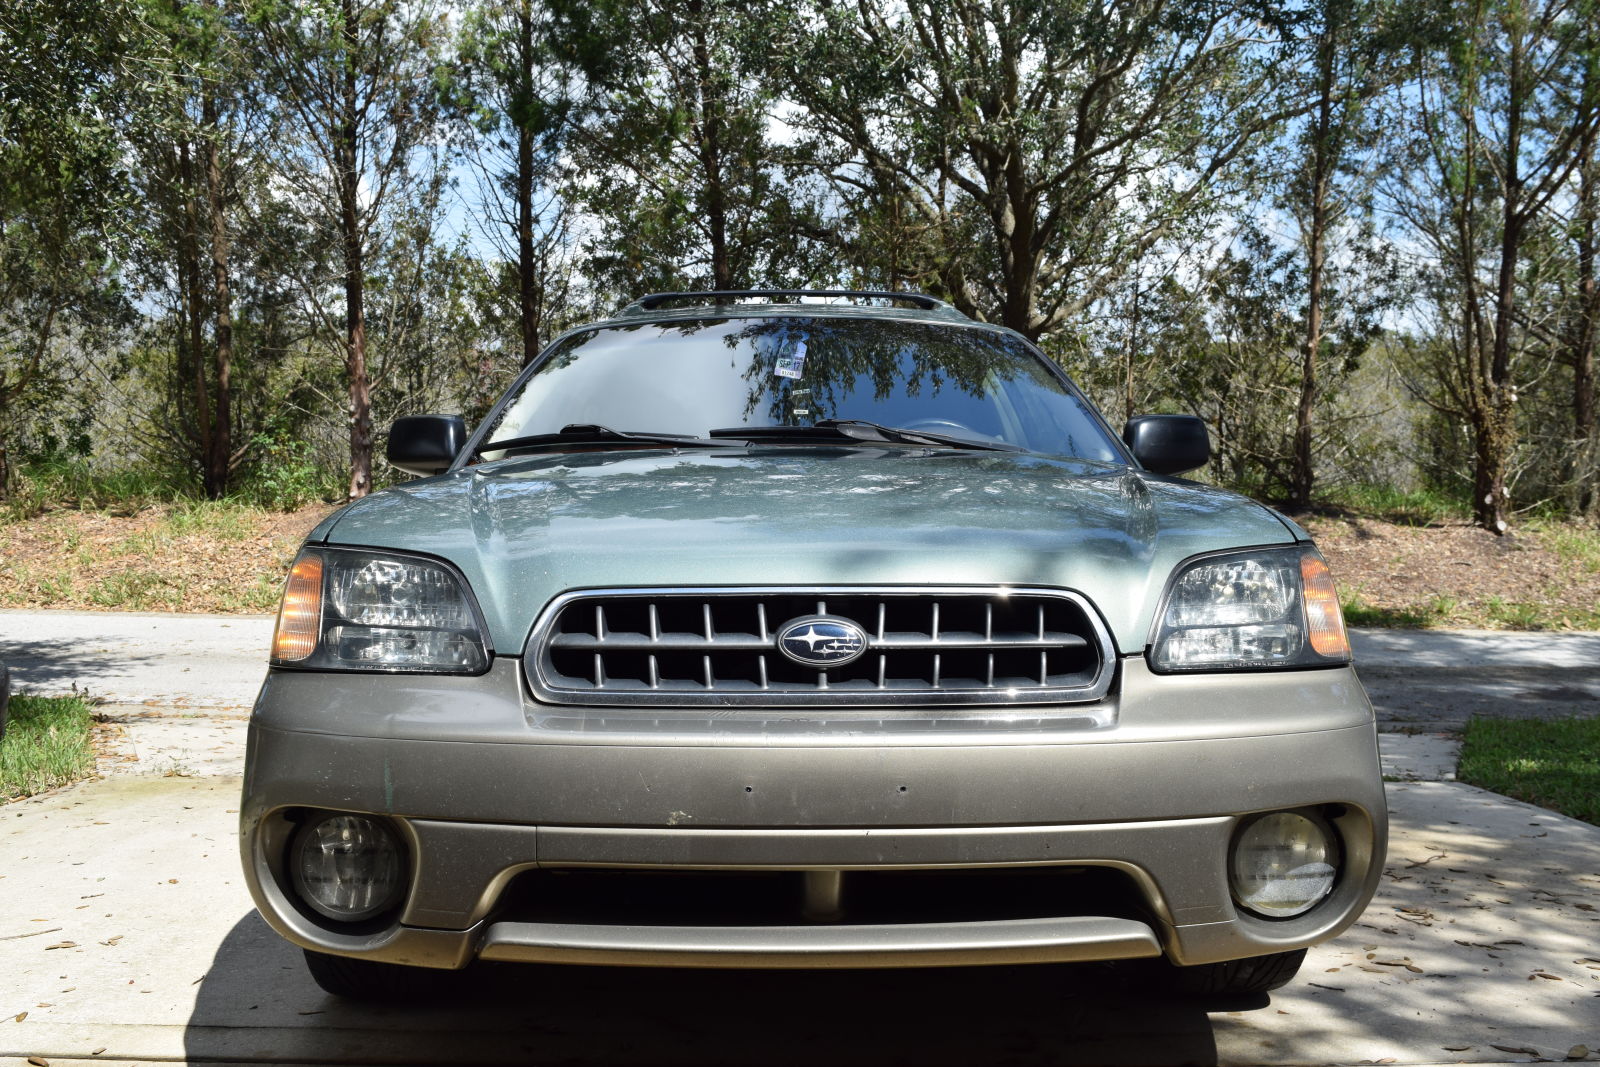 Illustration for article titled My 2004 Subaru Outback 2.5i (and everything wrong with it)em/em